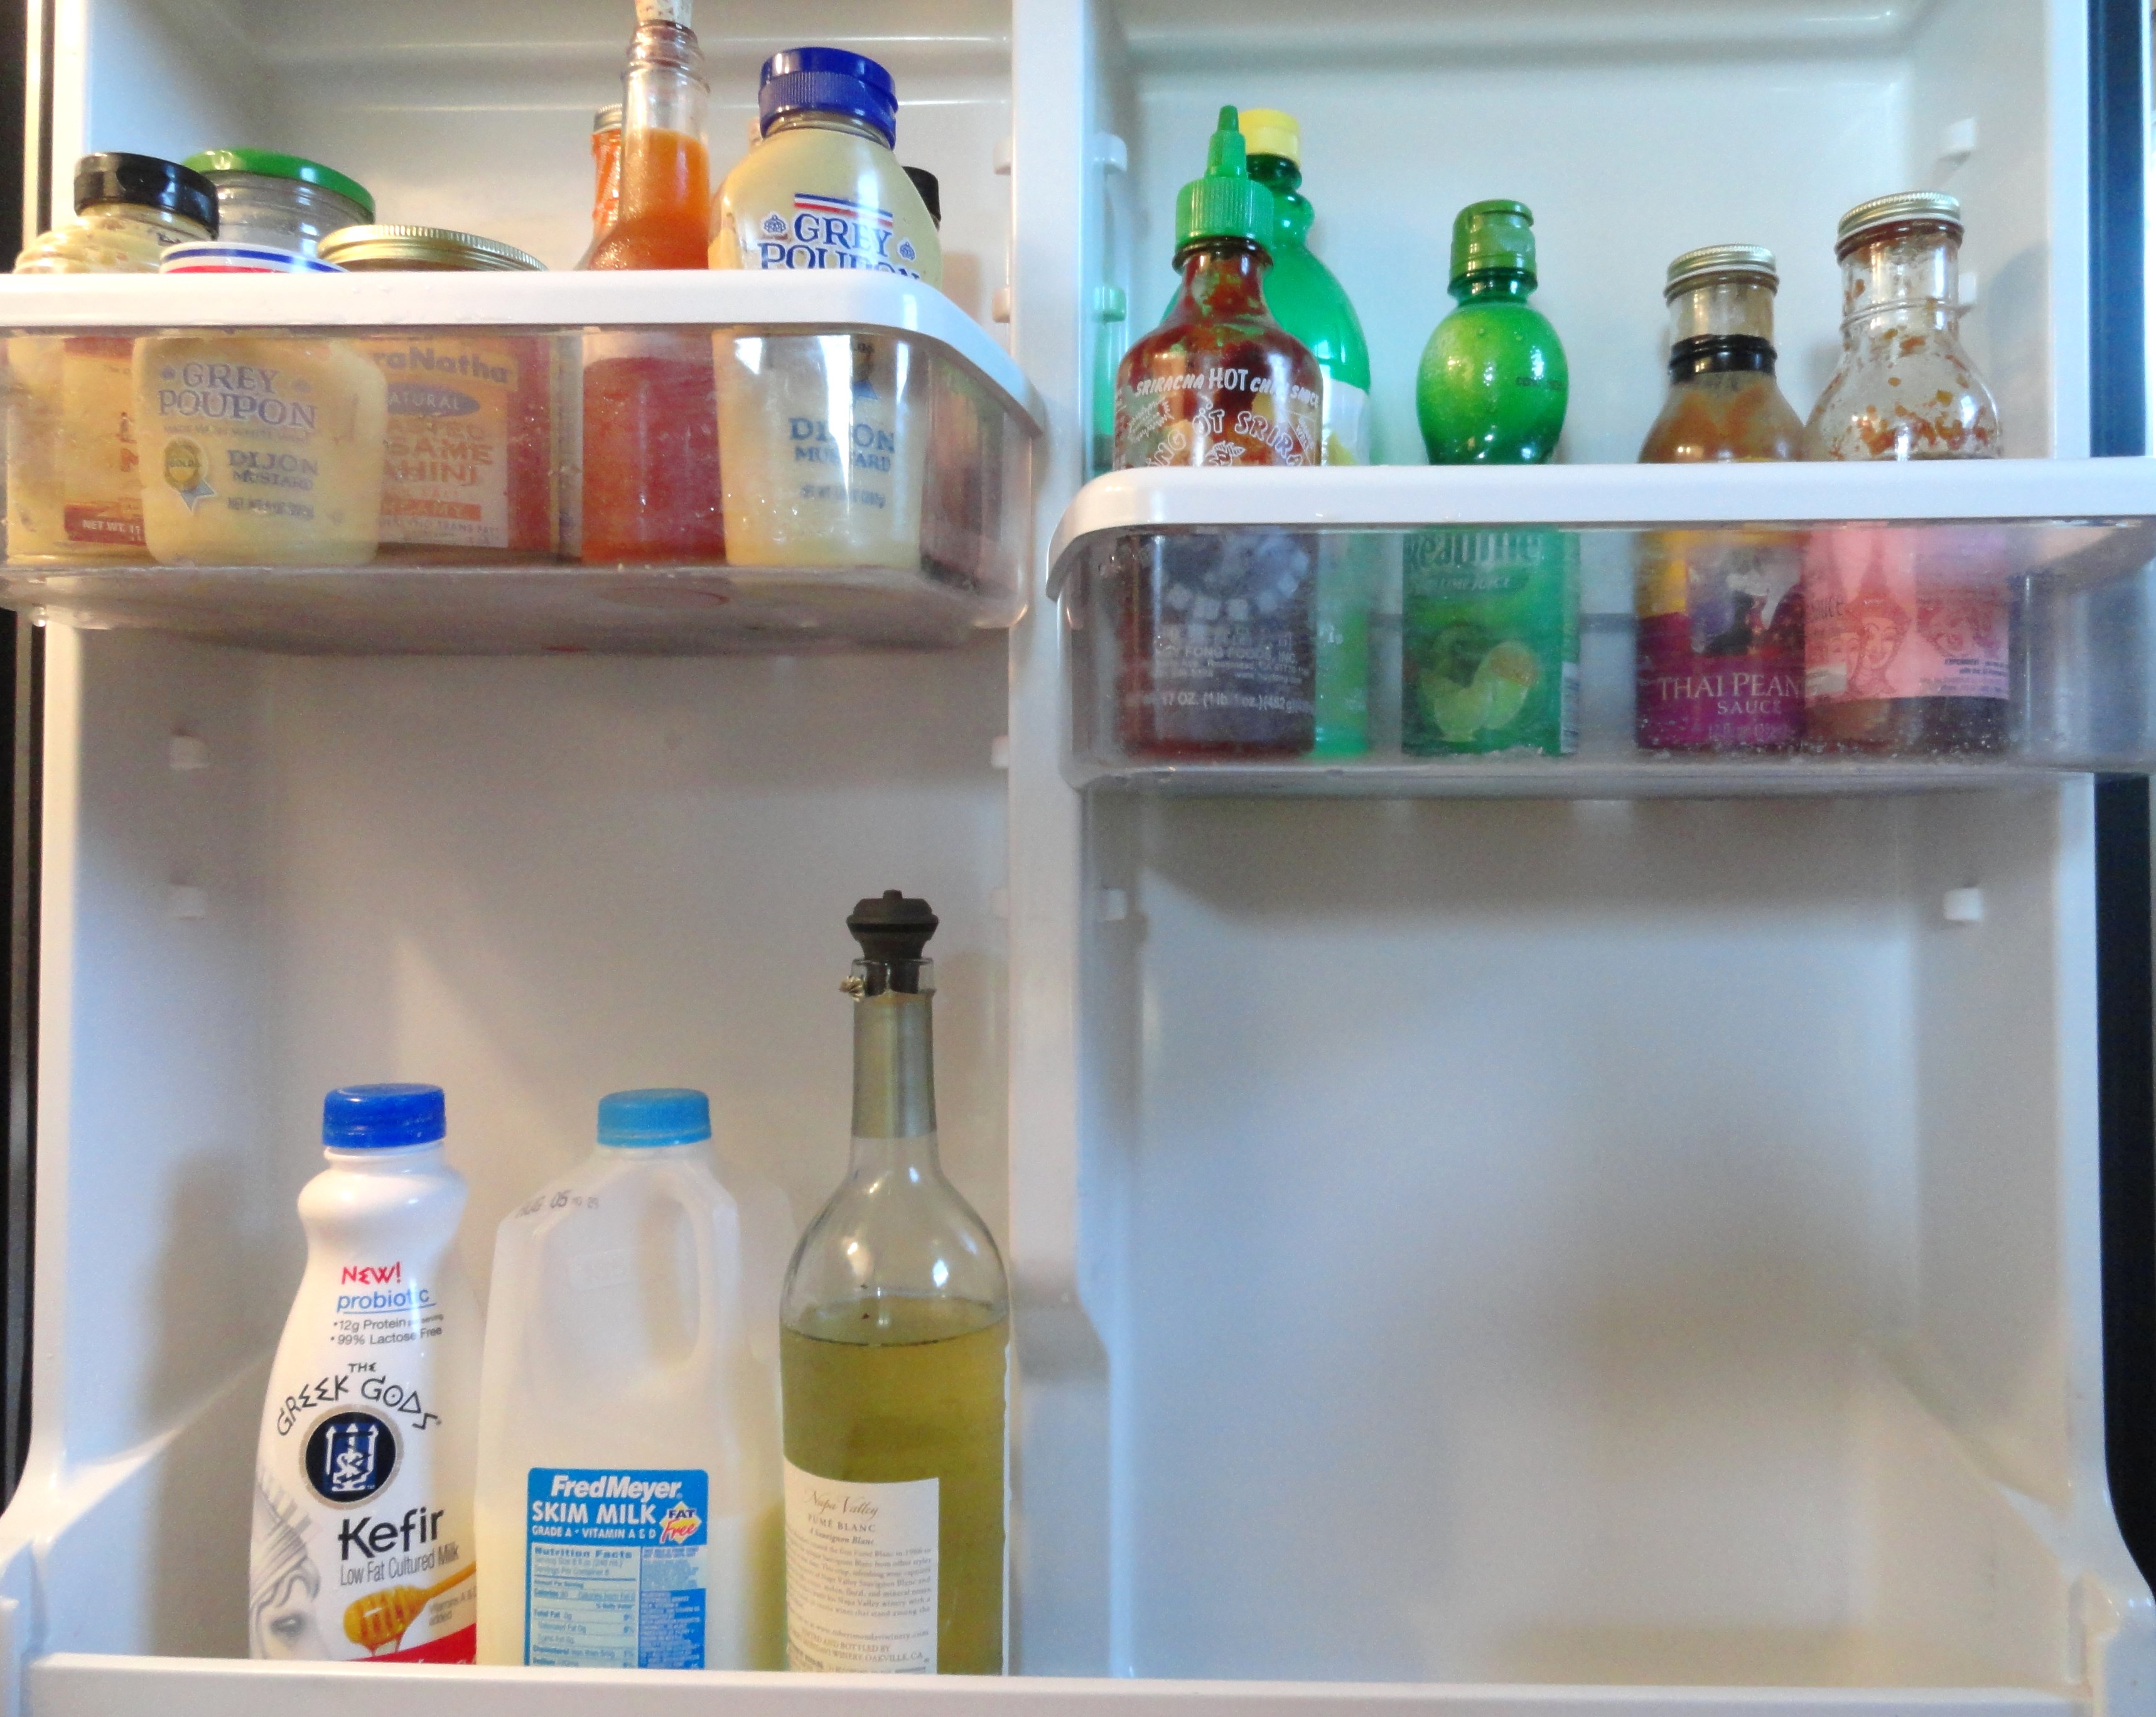 Inside the Fridge Welcomes Healthy Leftover Queen Mindy Nicholas